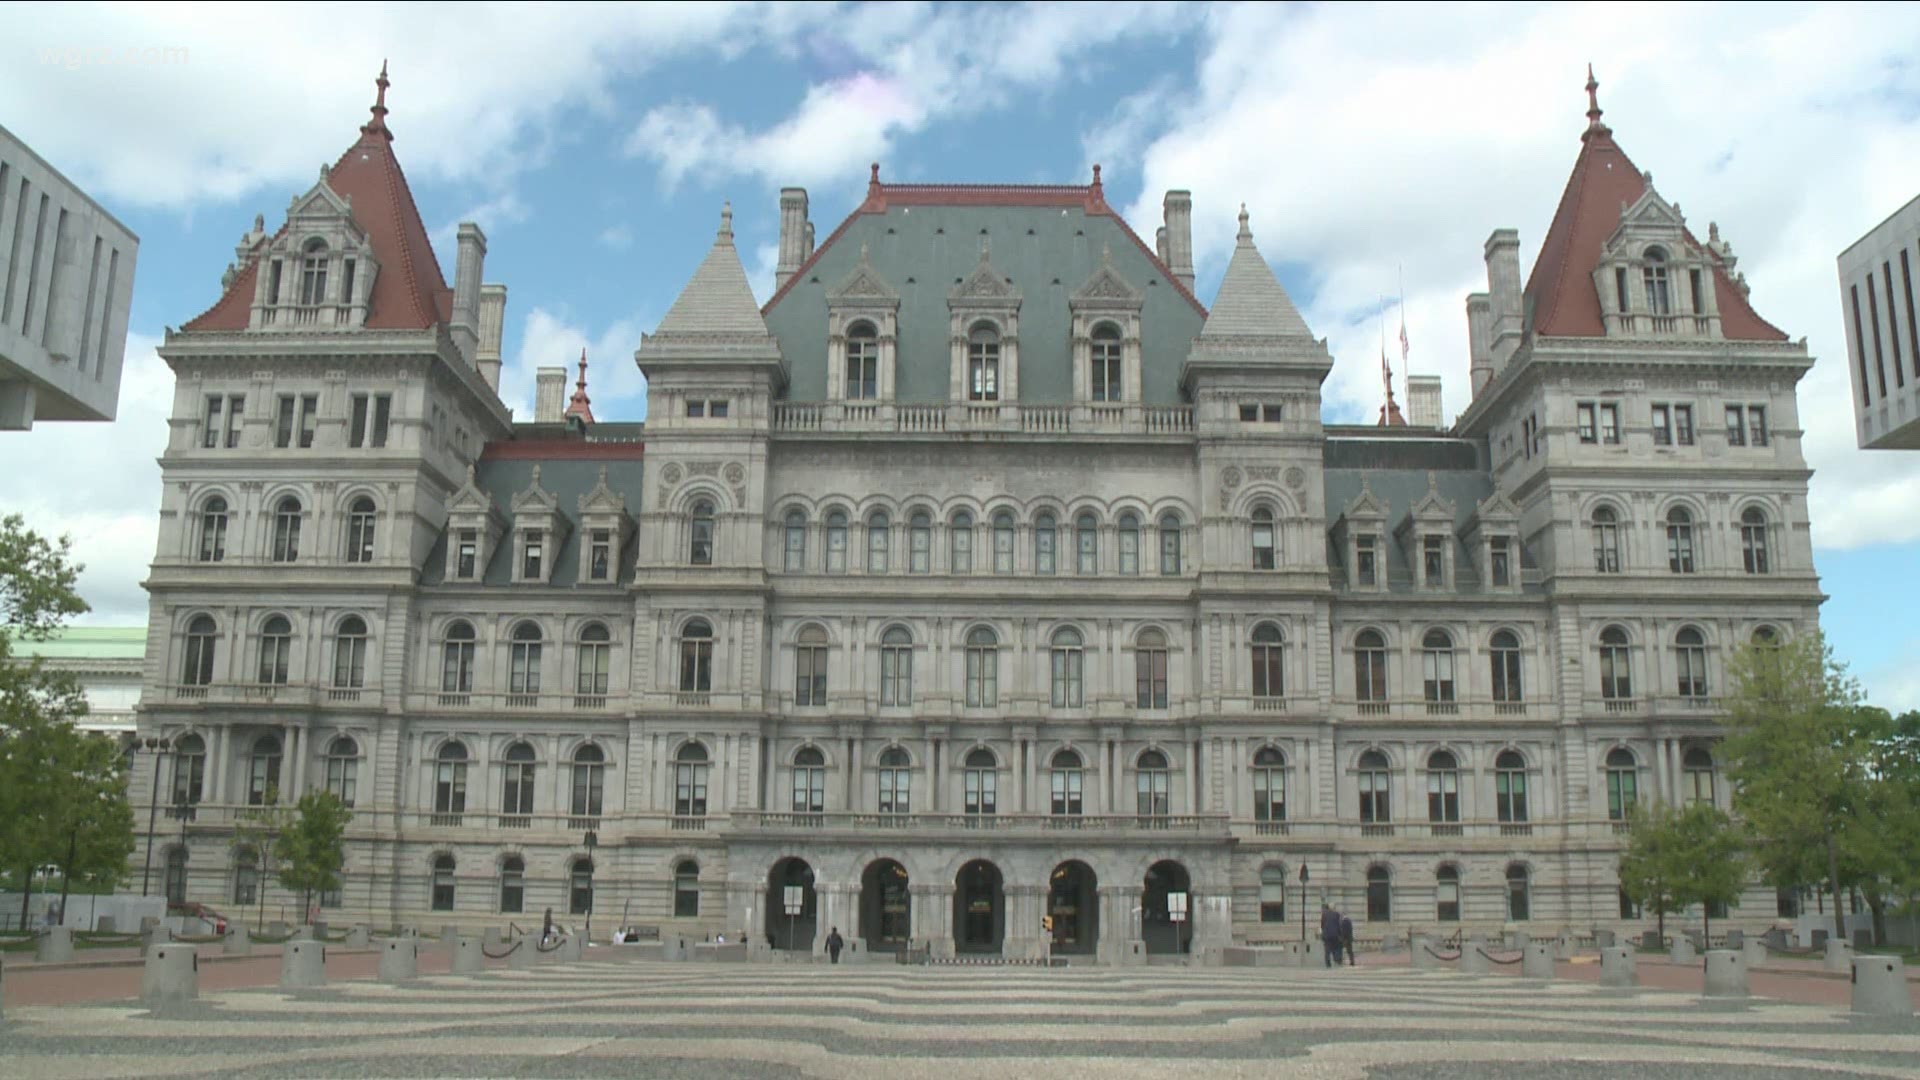 For the first time in 460 days... the New York State Capitol building will be open to the public tomorrow